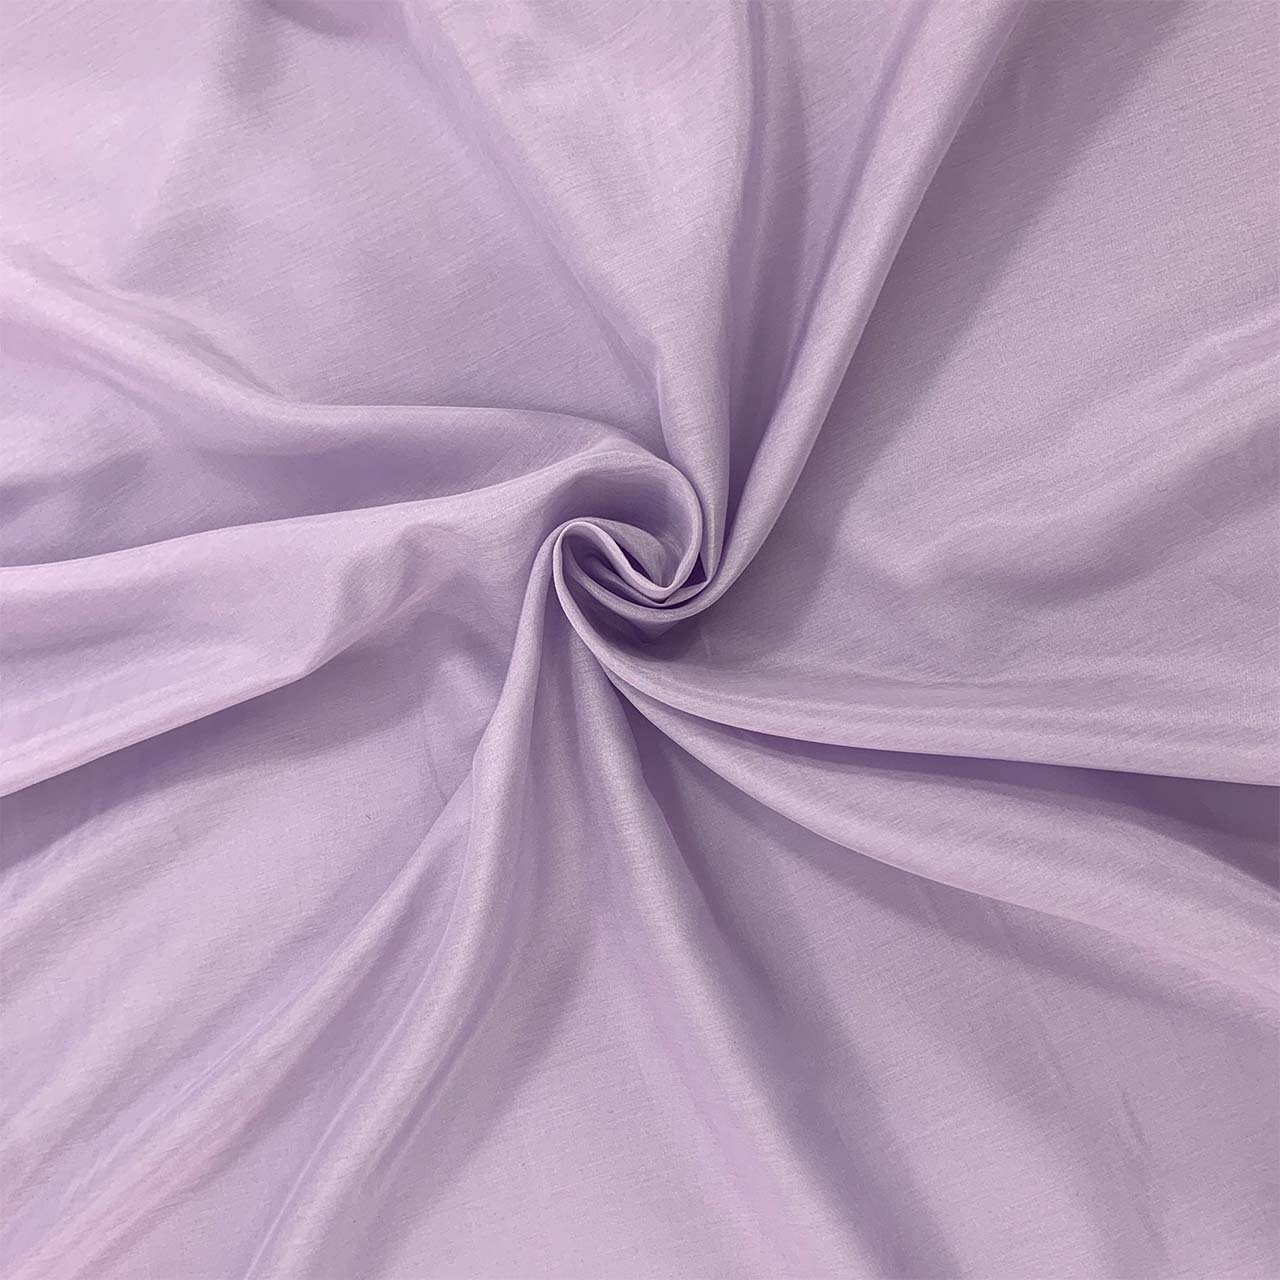 lavender silk cotton blend fabric lavender voile fabric - Fabric Collection